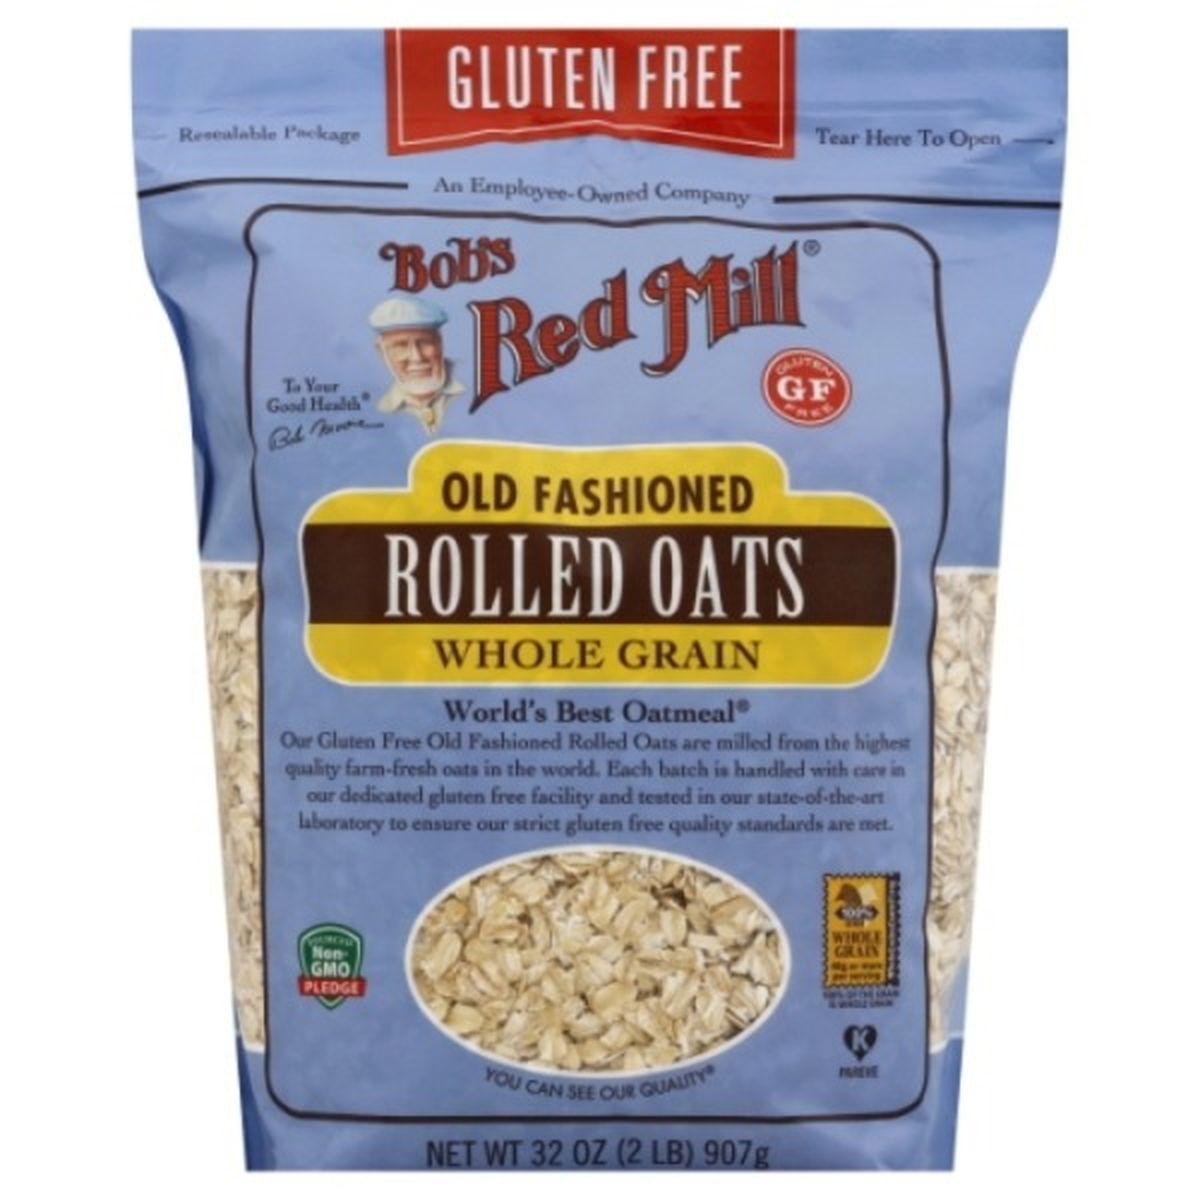 Calories in Bob's Red Mill Rolled Oats, Old Fashioned, Whole Grain